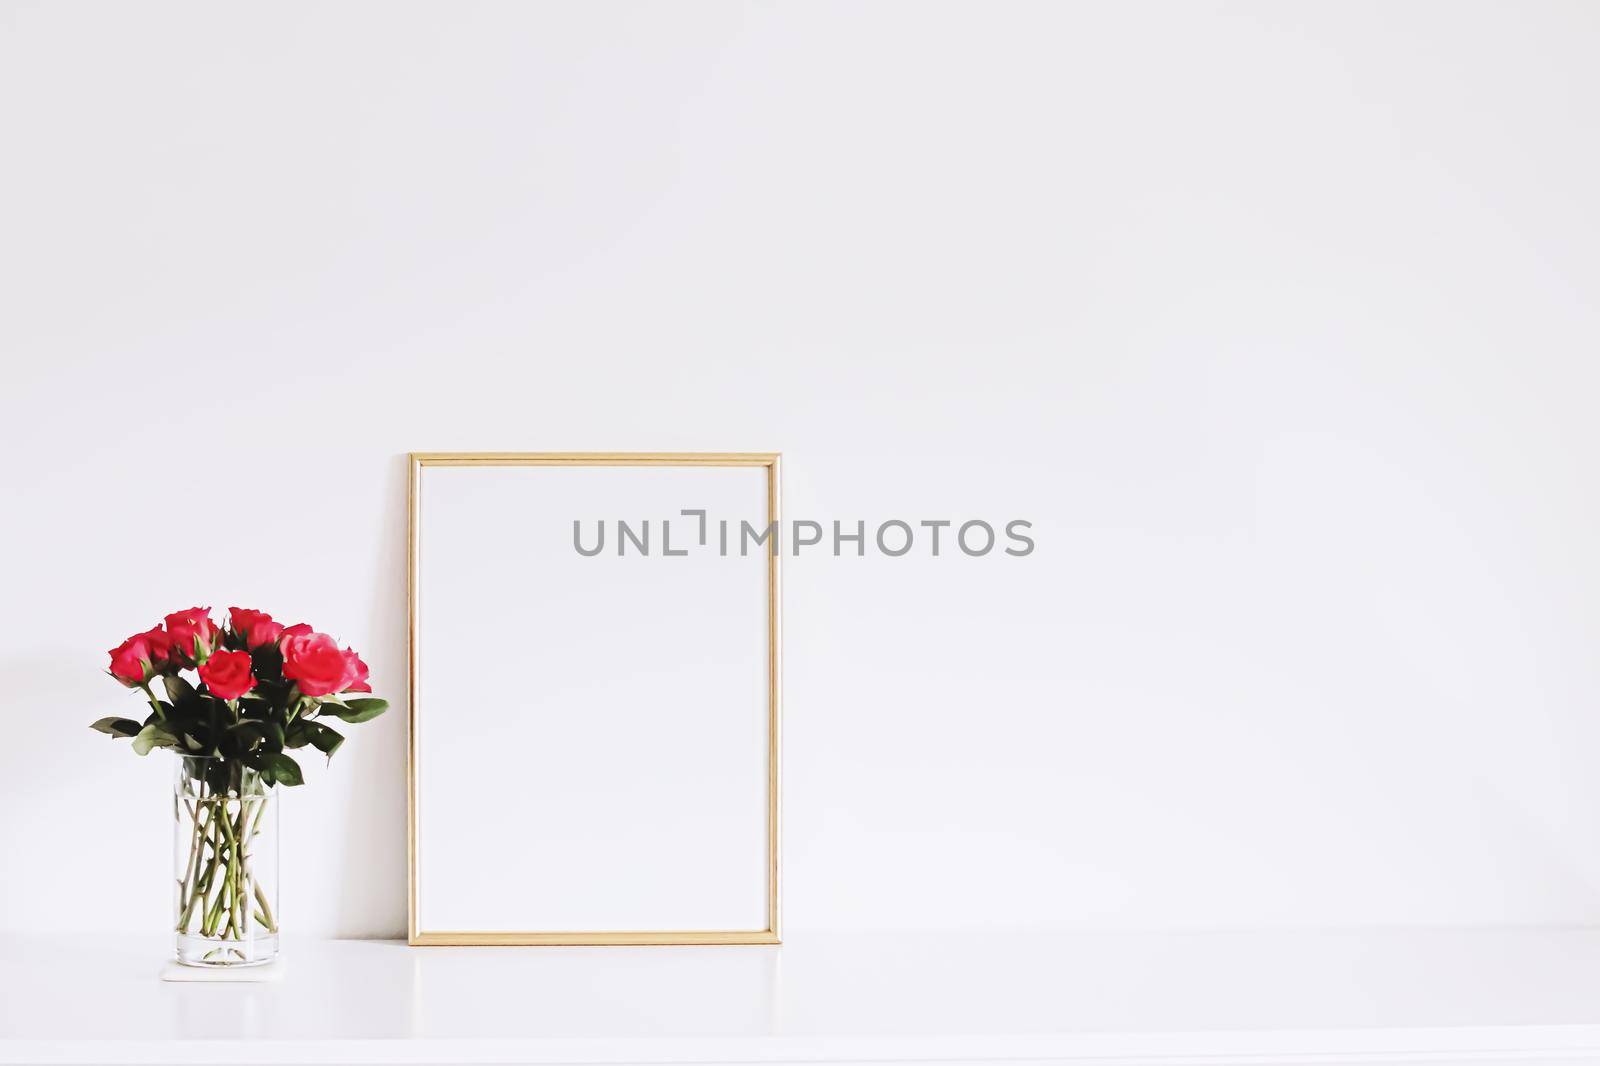 Golden horizontal frame and bouquet of rose flowers on white furniture, luxury home decor and design for mockup creations